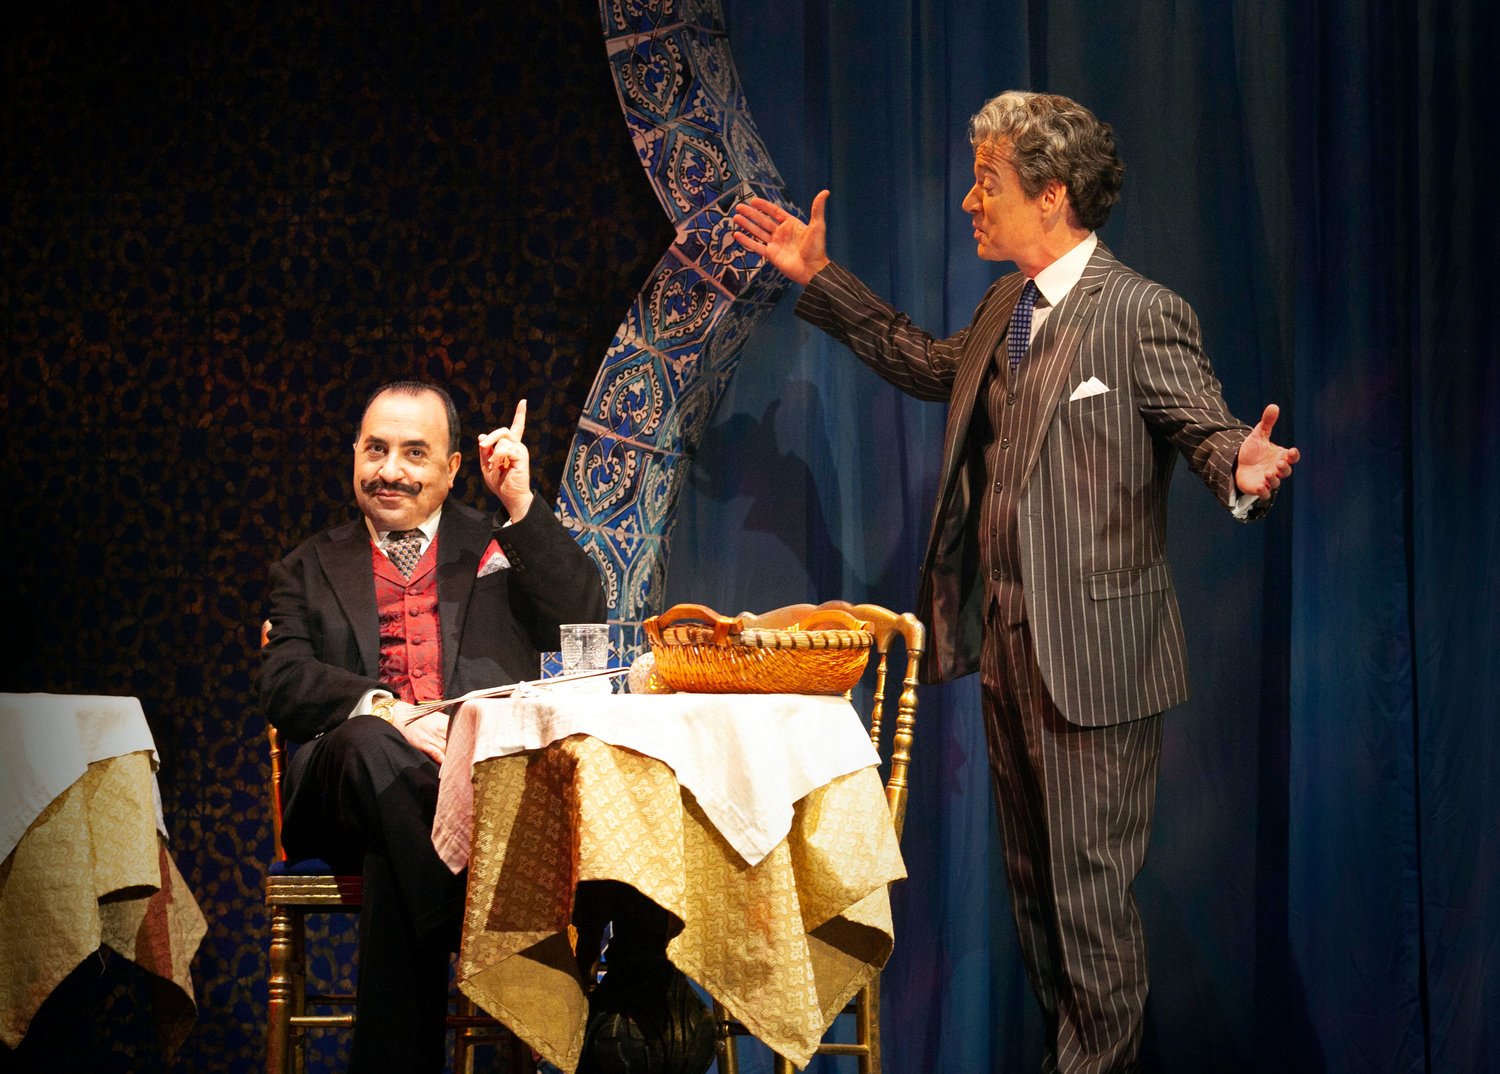  Steven Rattazzi and Christopher Gurr in Agatha Christie’s Murder on the Orient Express at the Ogunquit Playhouse. Photo by Jay Goldsmith 